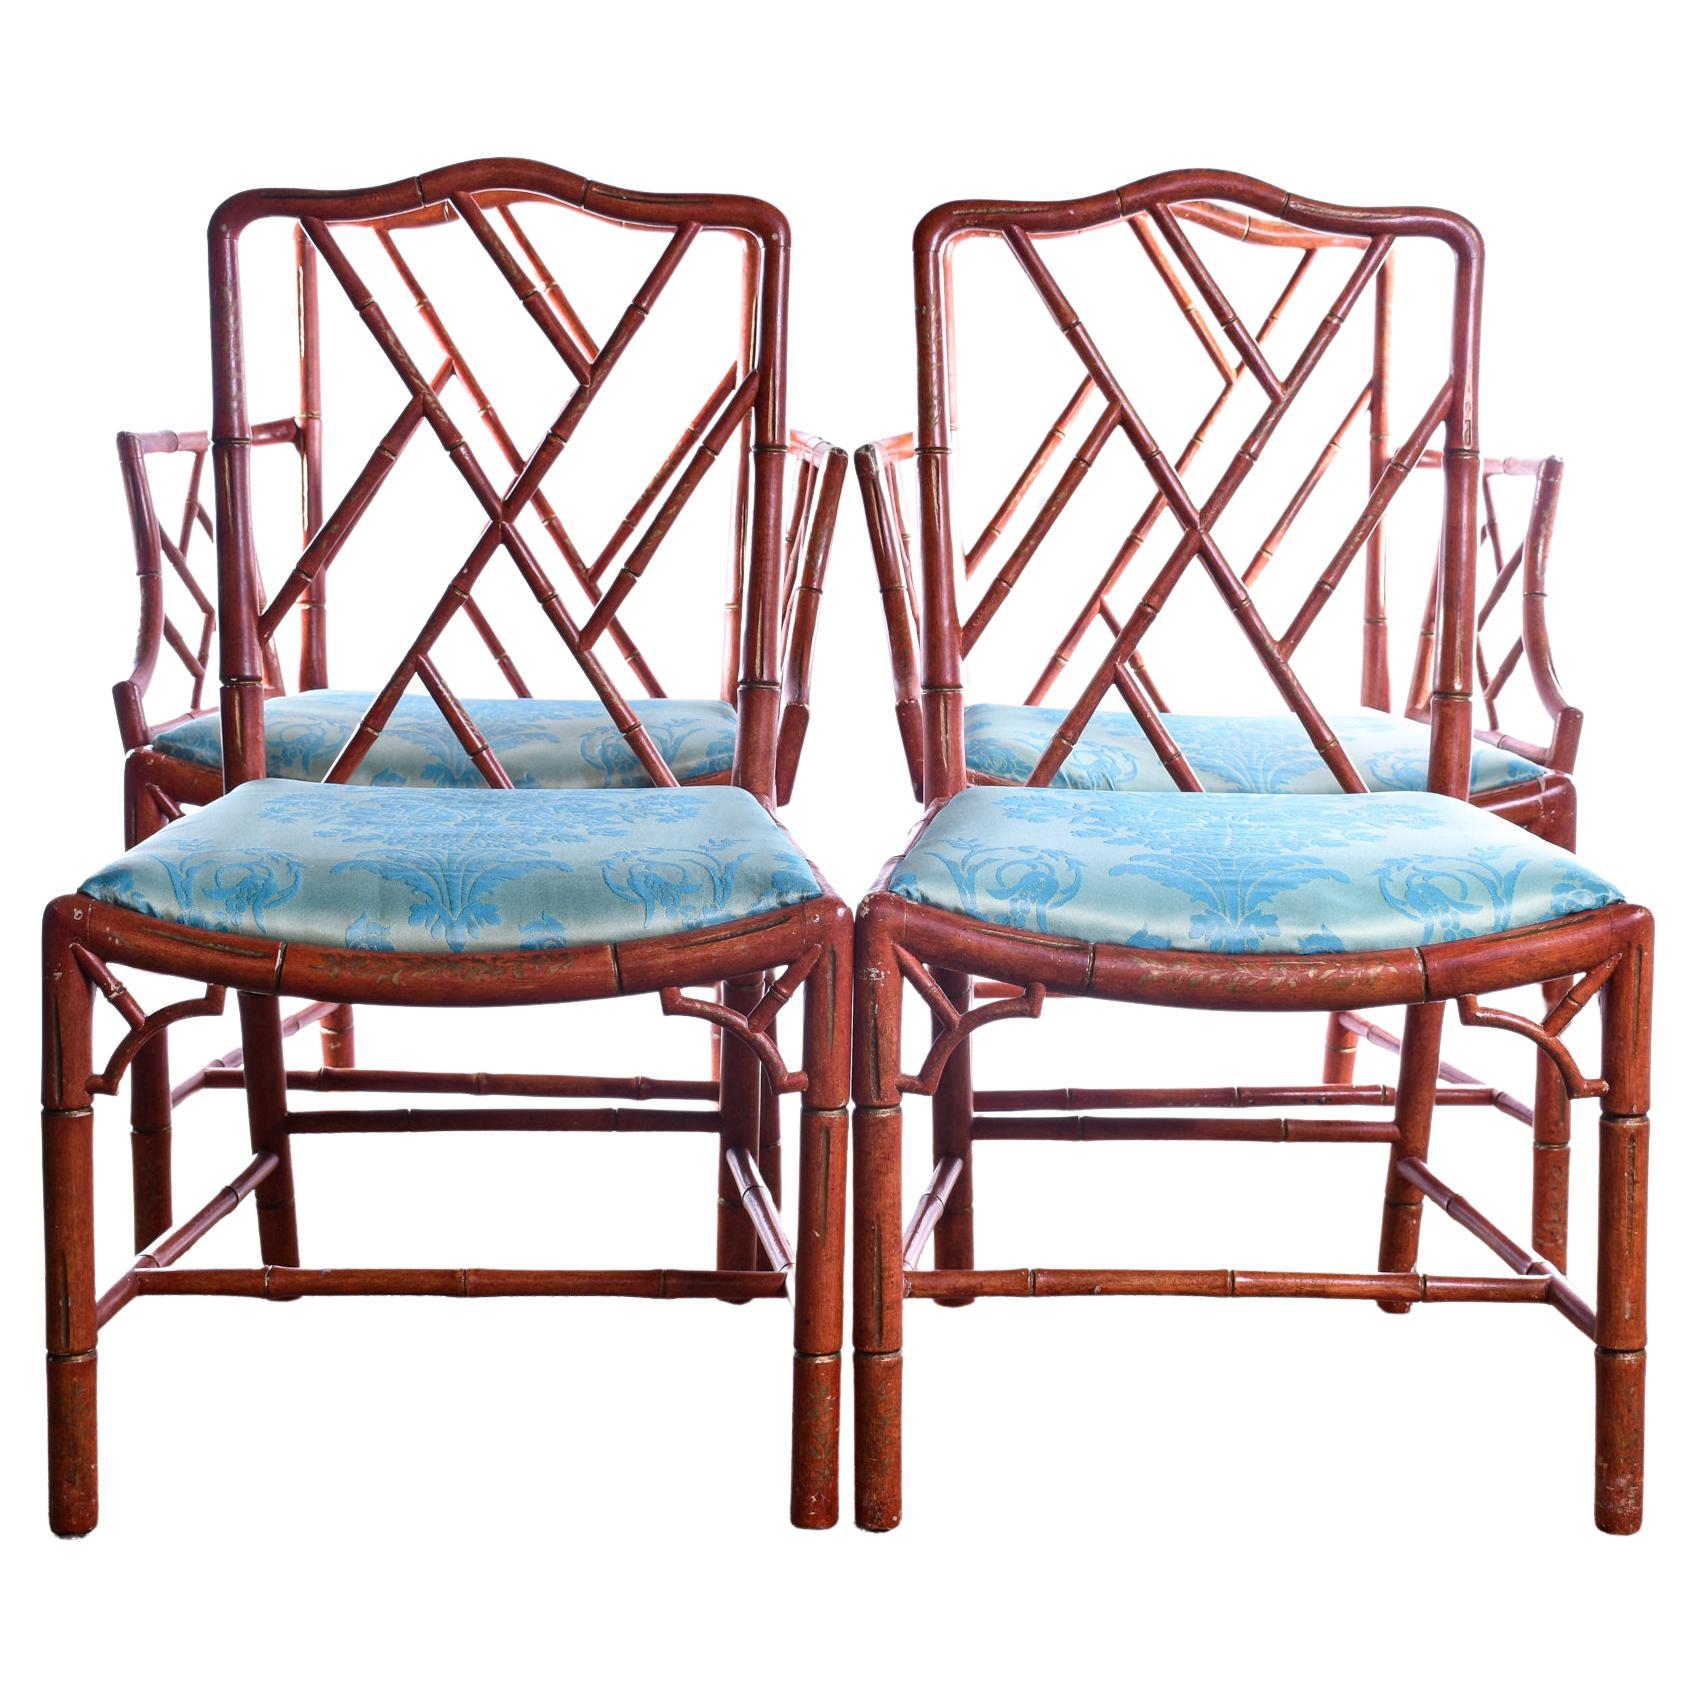 Chippendale Style Faux Bamboo Chairs